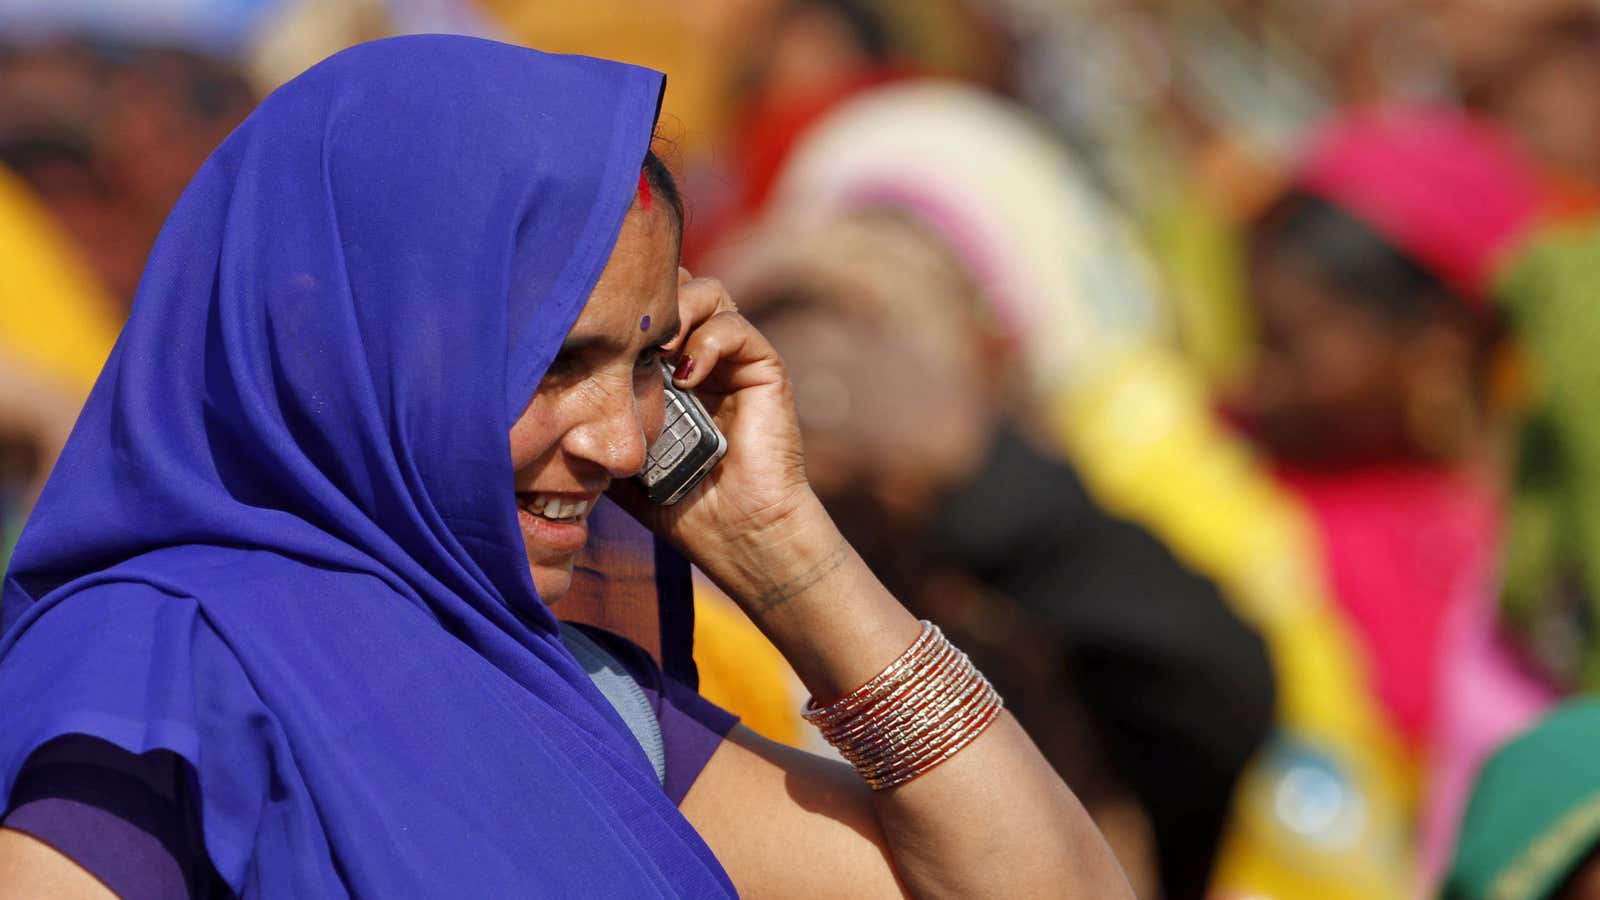 Her phone will soon be as Indian as her sari.